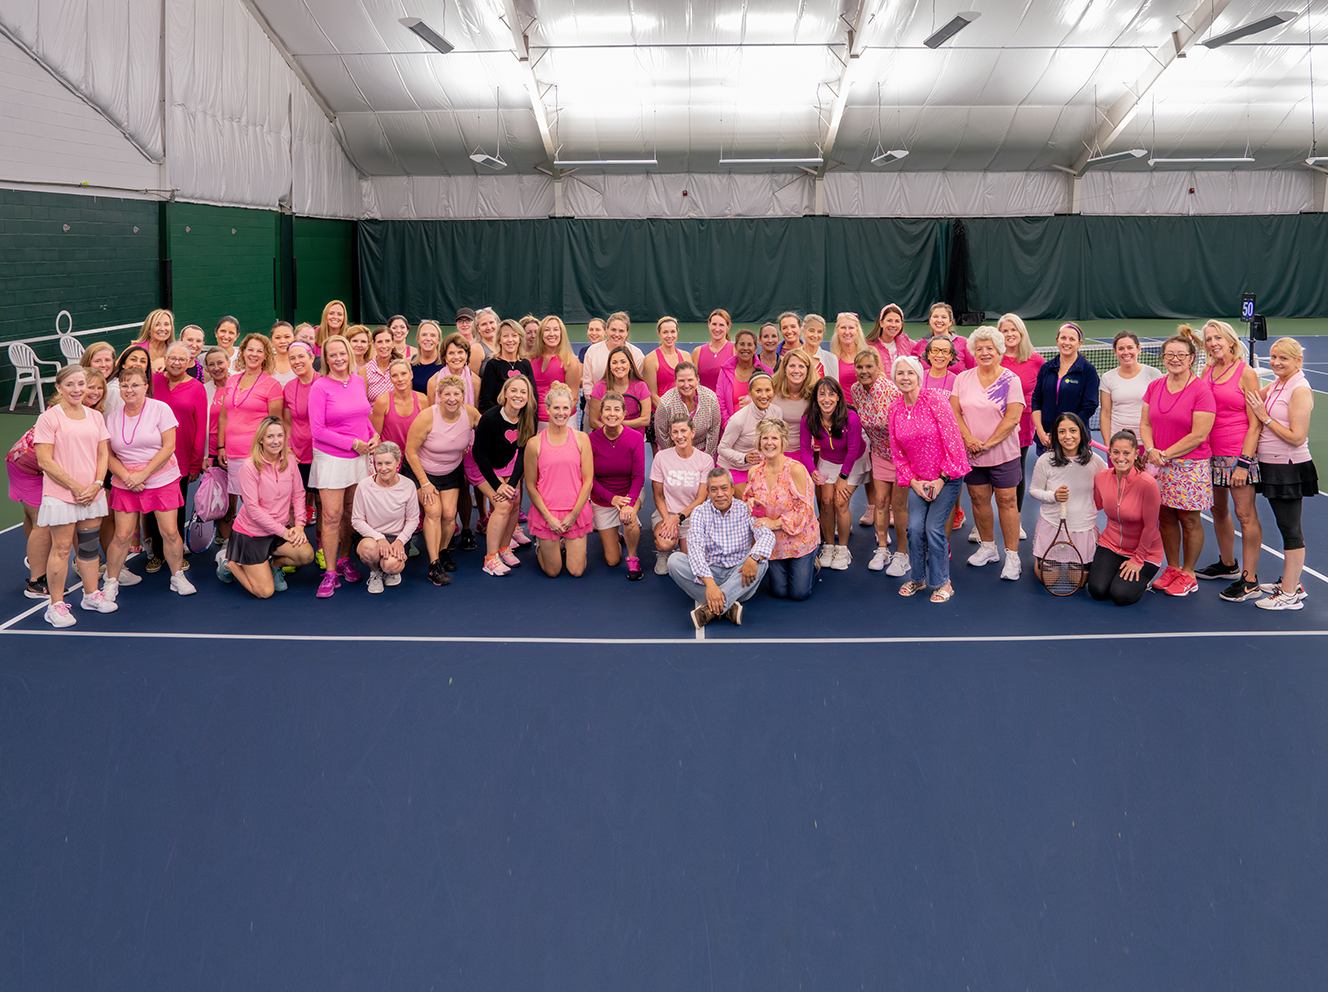 A Ladies Night Out to Support Breast Cancer Research